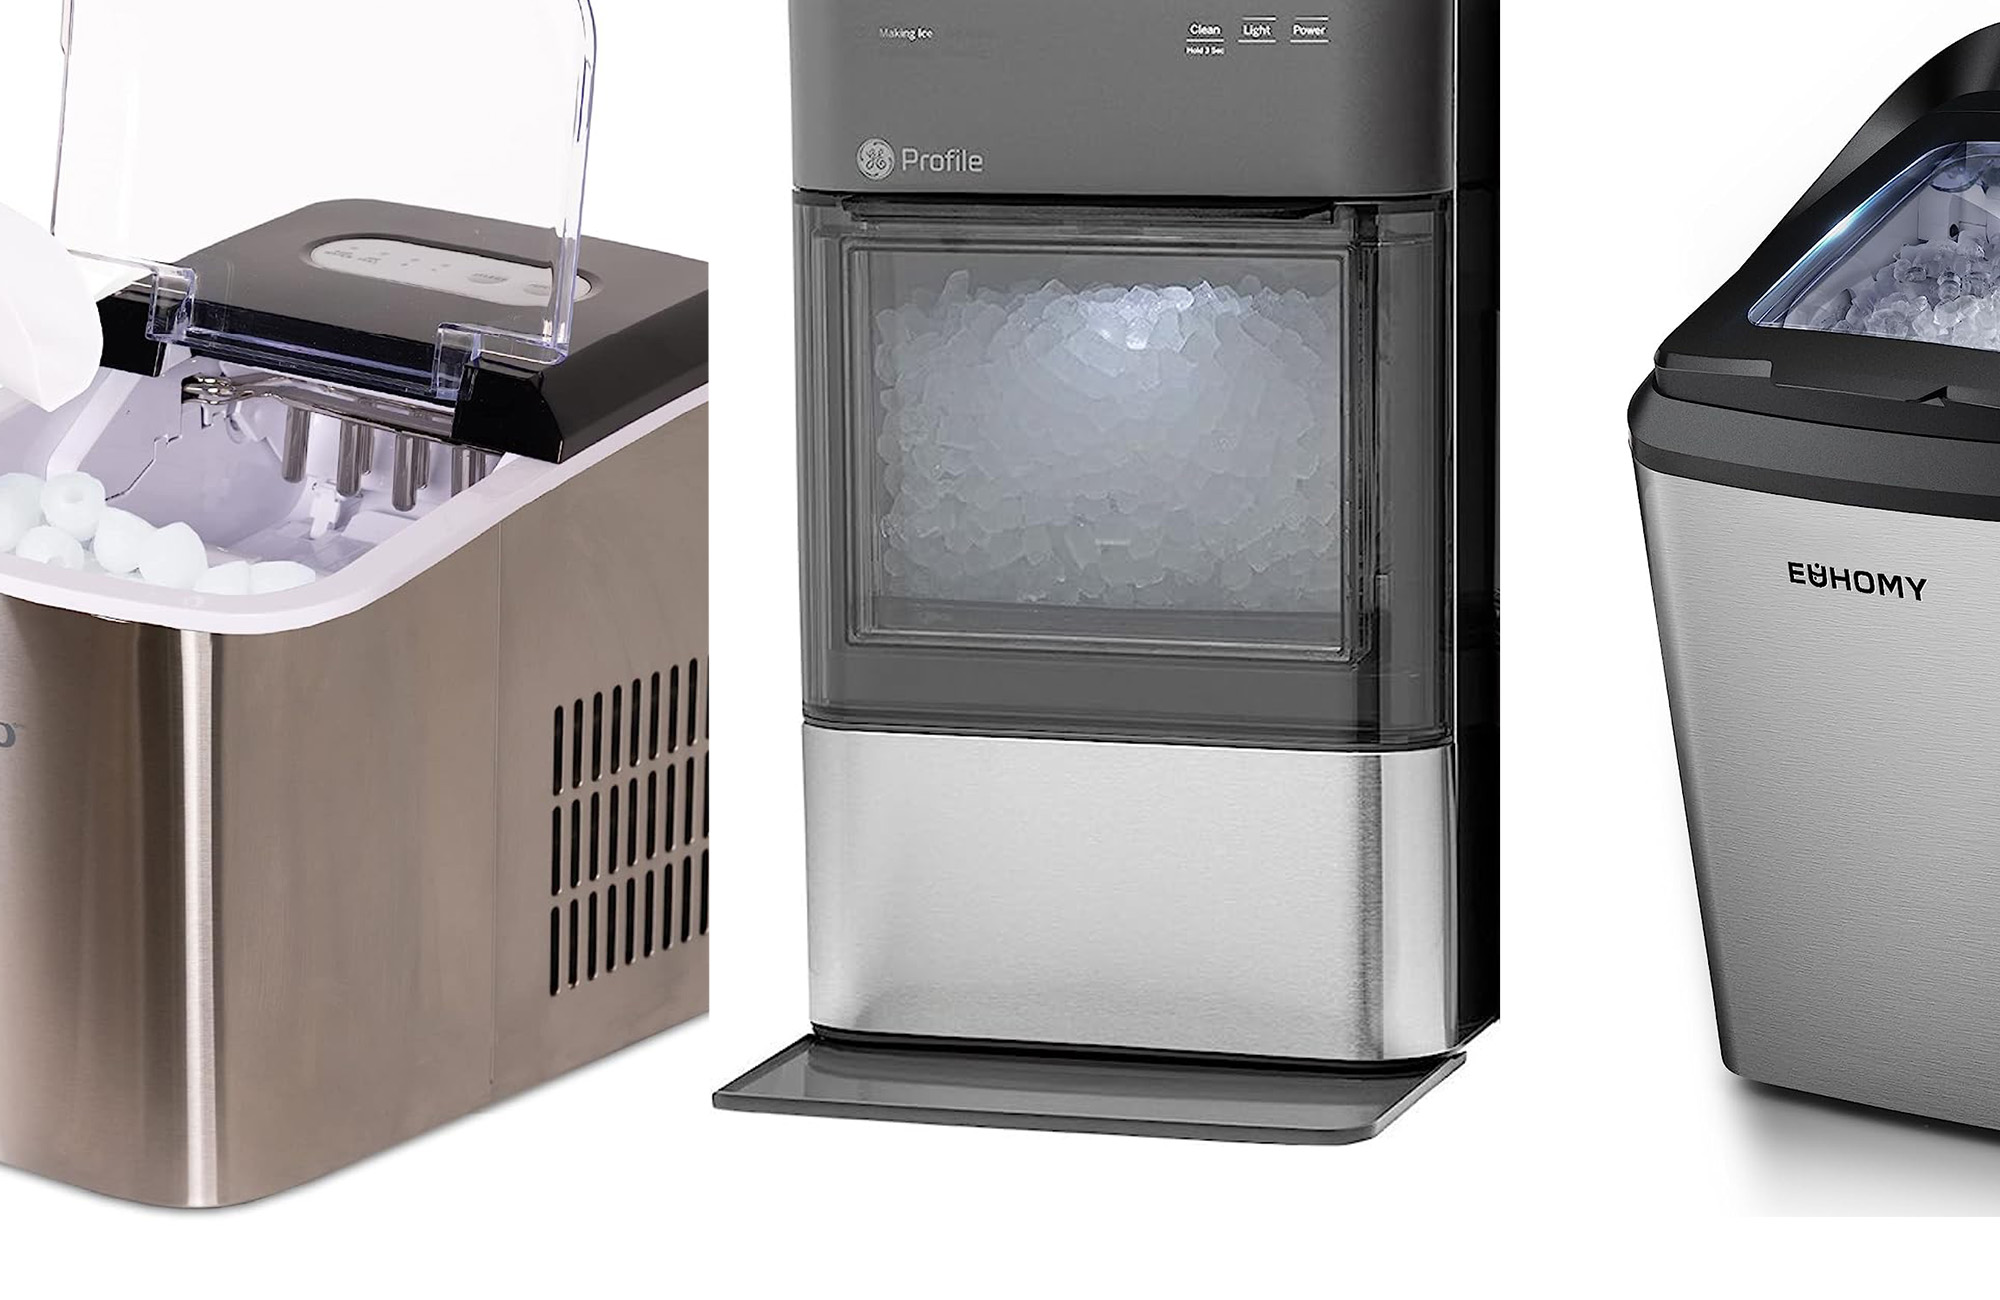 Nugget Ice Maker, Stainless Steel Countertop Ice Machine with